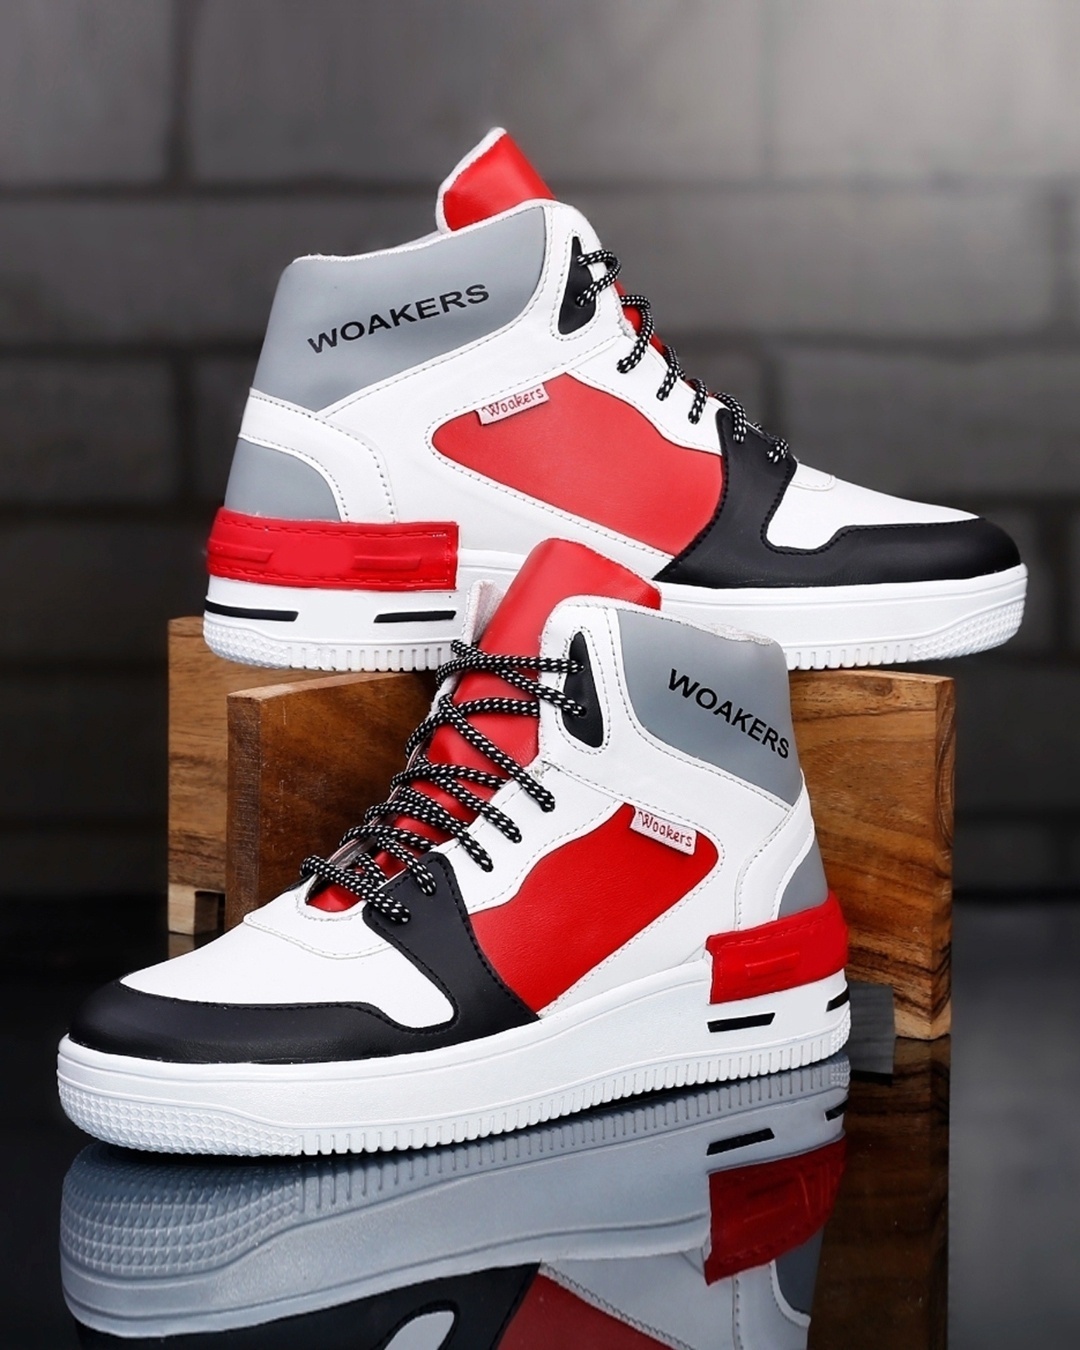 men s red white color block casual shoes 479854 1693303154 1